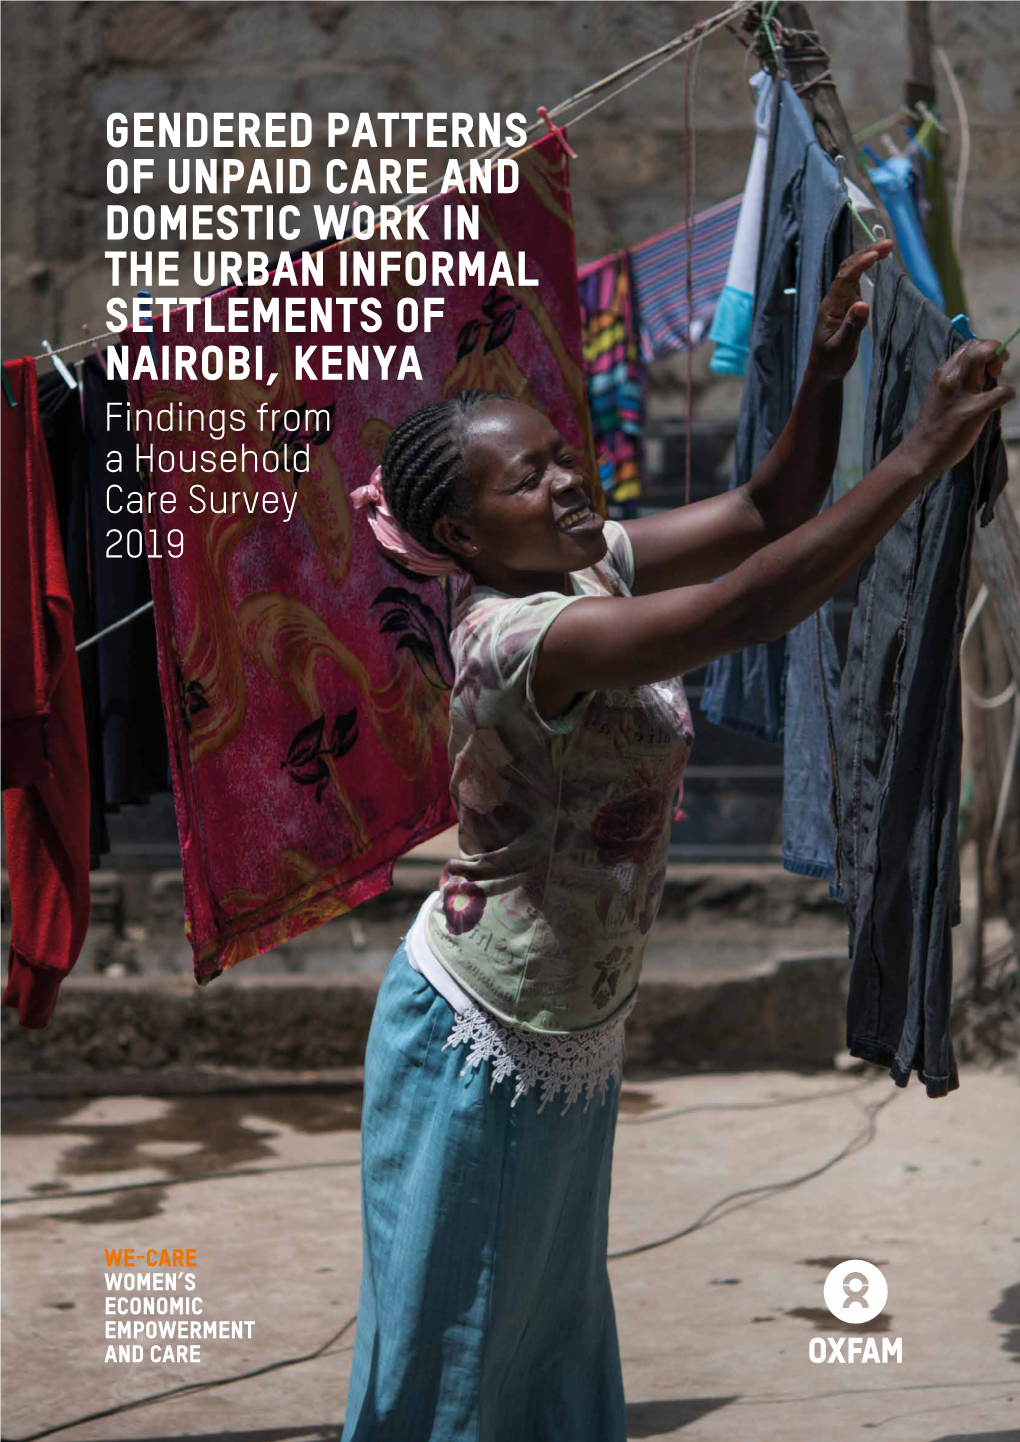 GENDERED PATTERNS of UNPAID CARE and DOMESTIC WORK in the URBAN INFORMAL SETTLEMENTS of NAIROBI, KENYA Findings from a Household Care Survey 2019